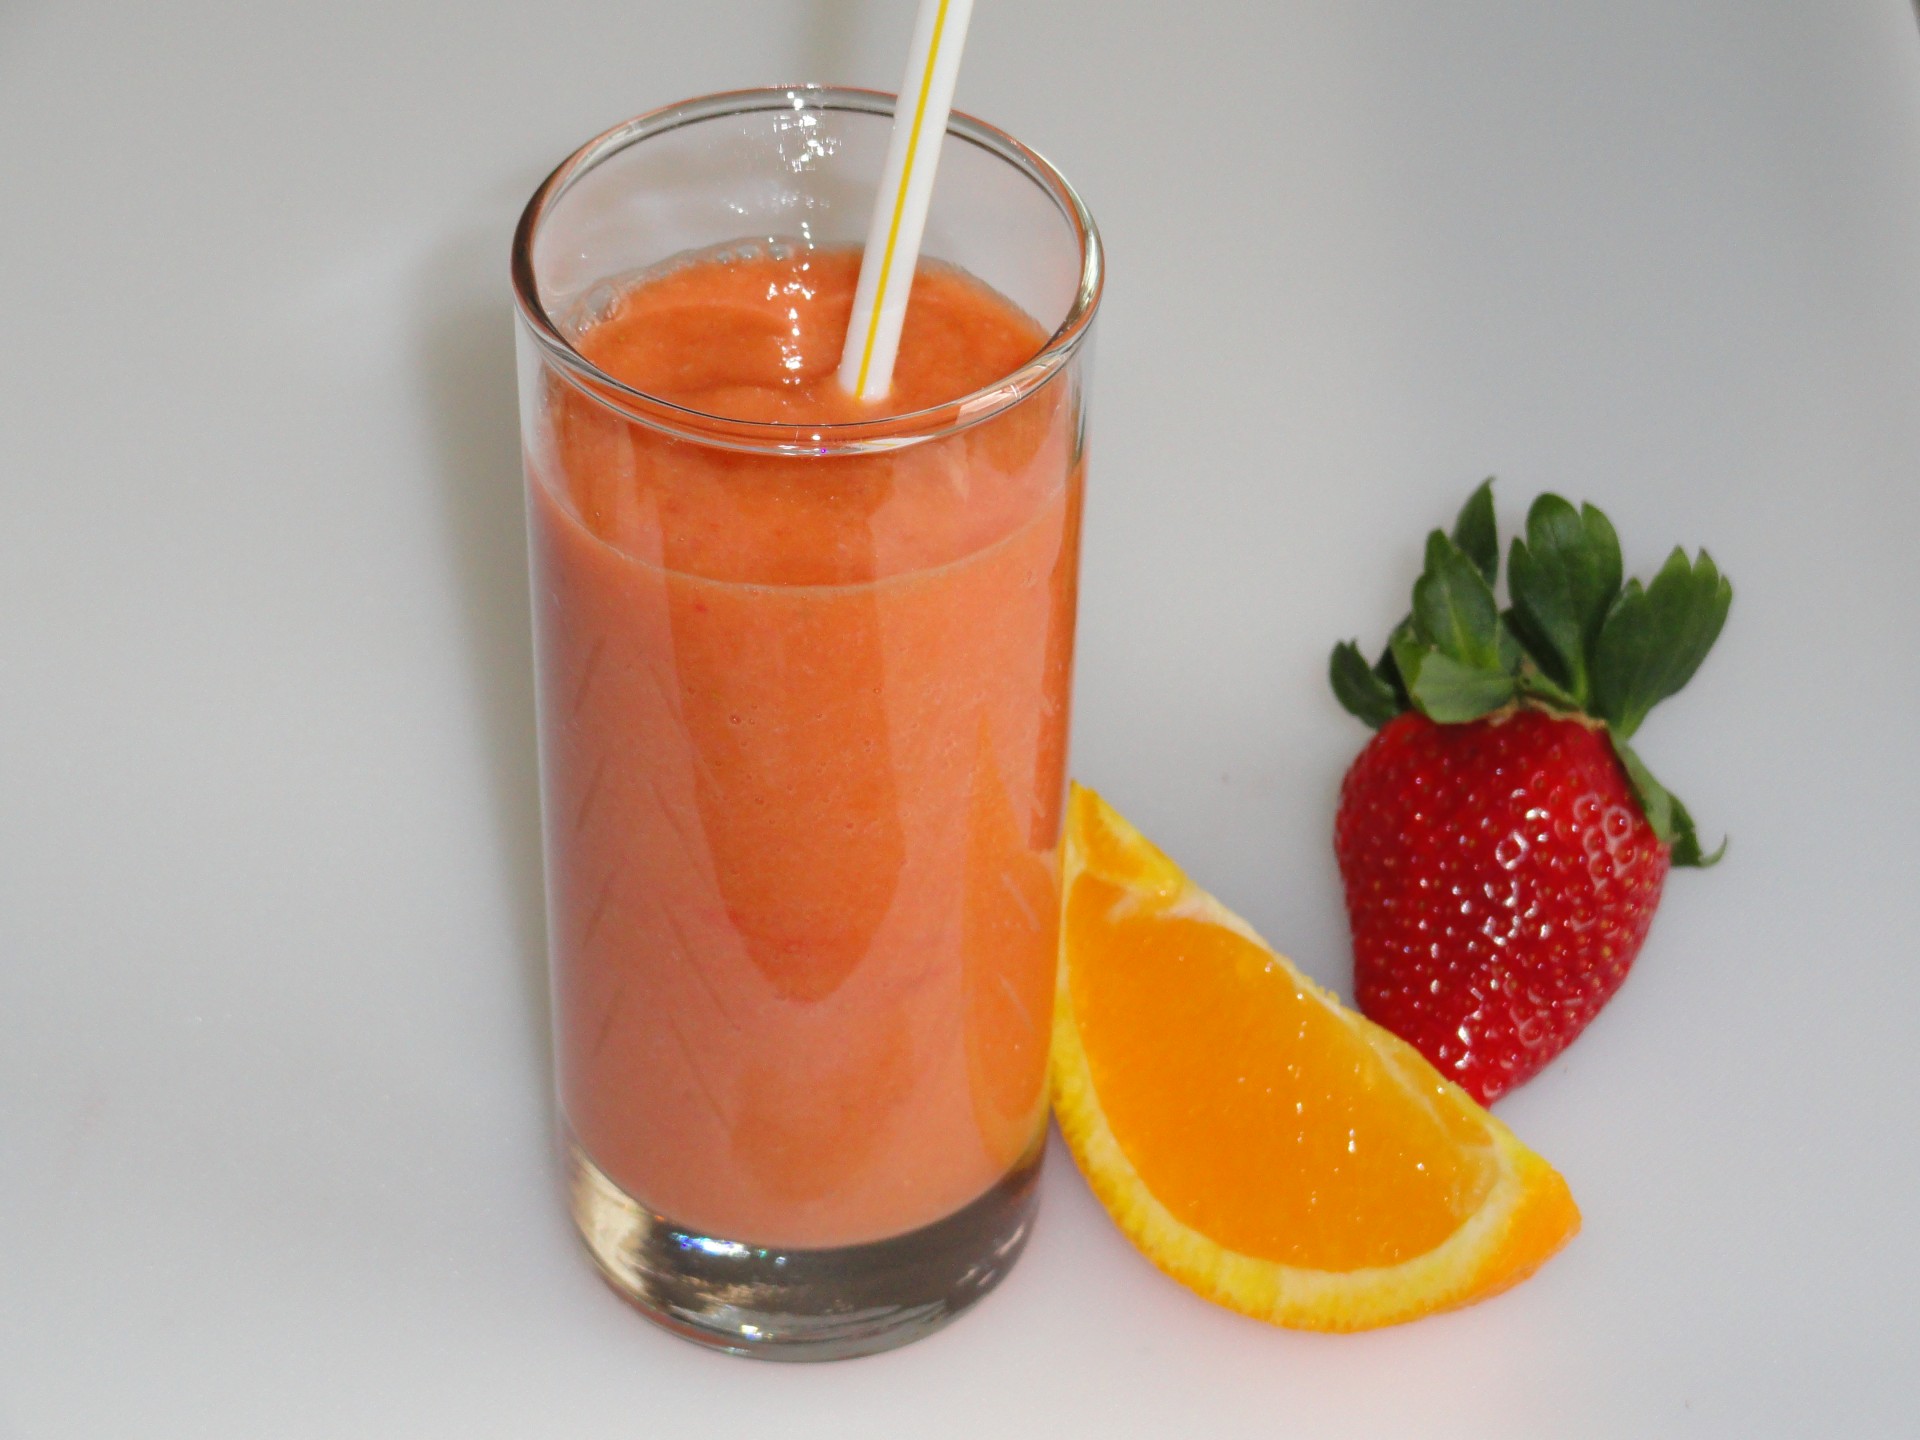 Shannon's Cantaloupe Delight Smoothie